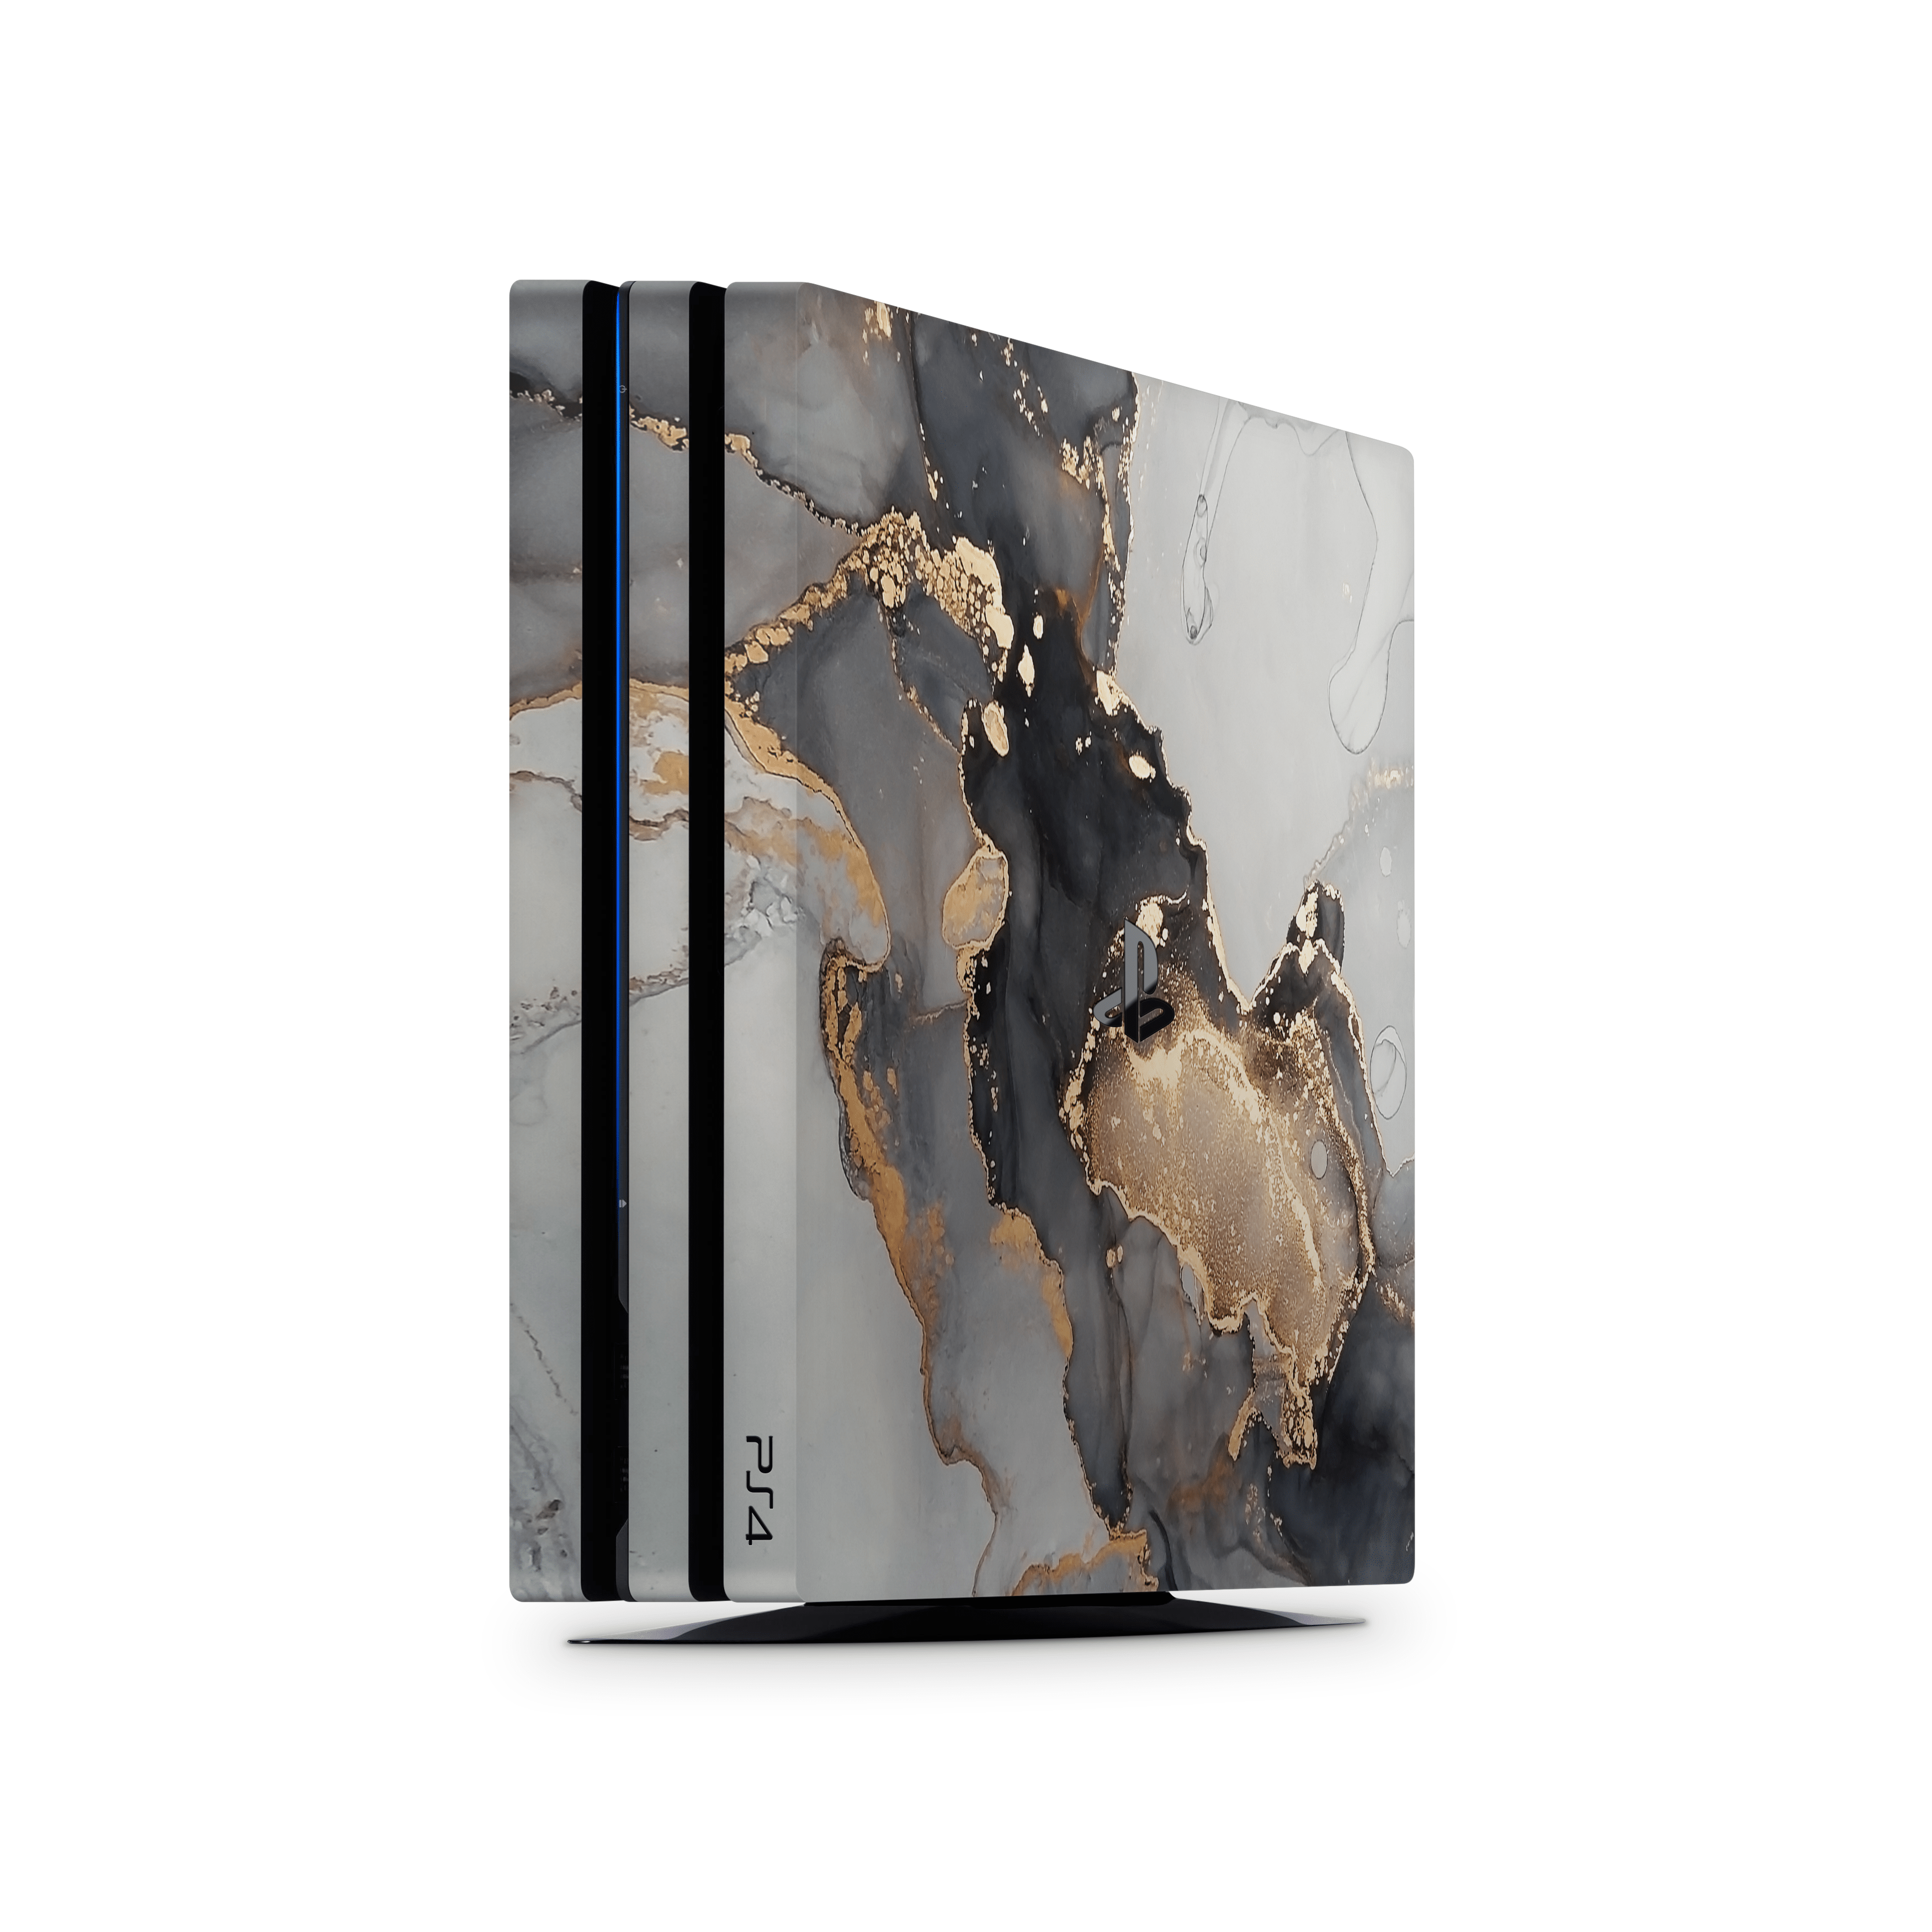 Black Marble PS4 | PS4 Pro | PS4 Slim Skins